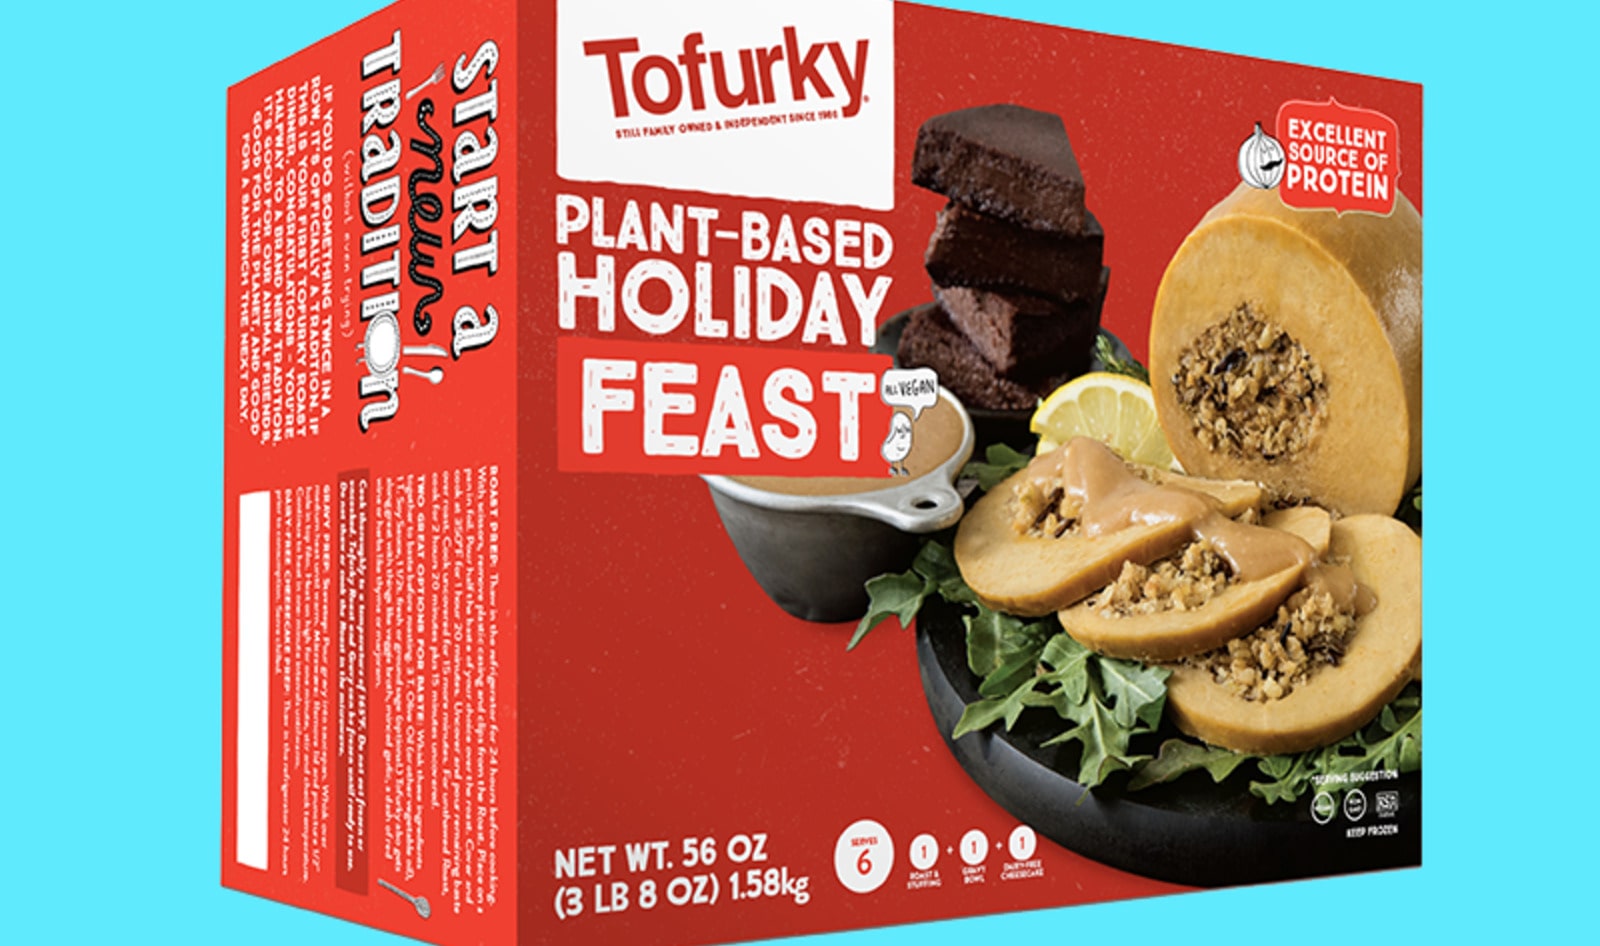 Tofurky Adds Vegan Cheesecake to Holiday Feast